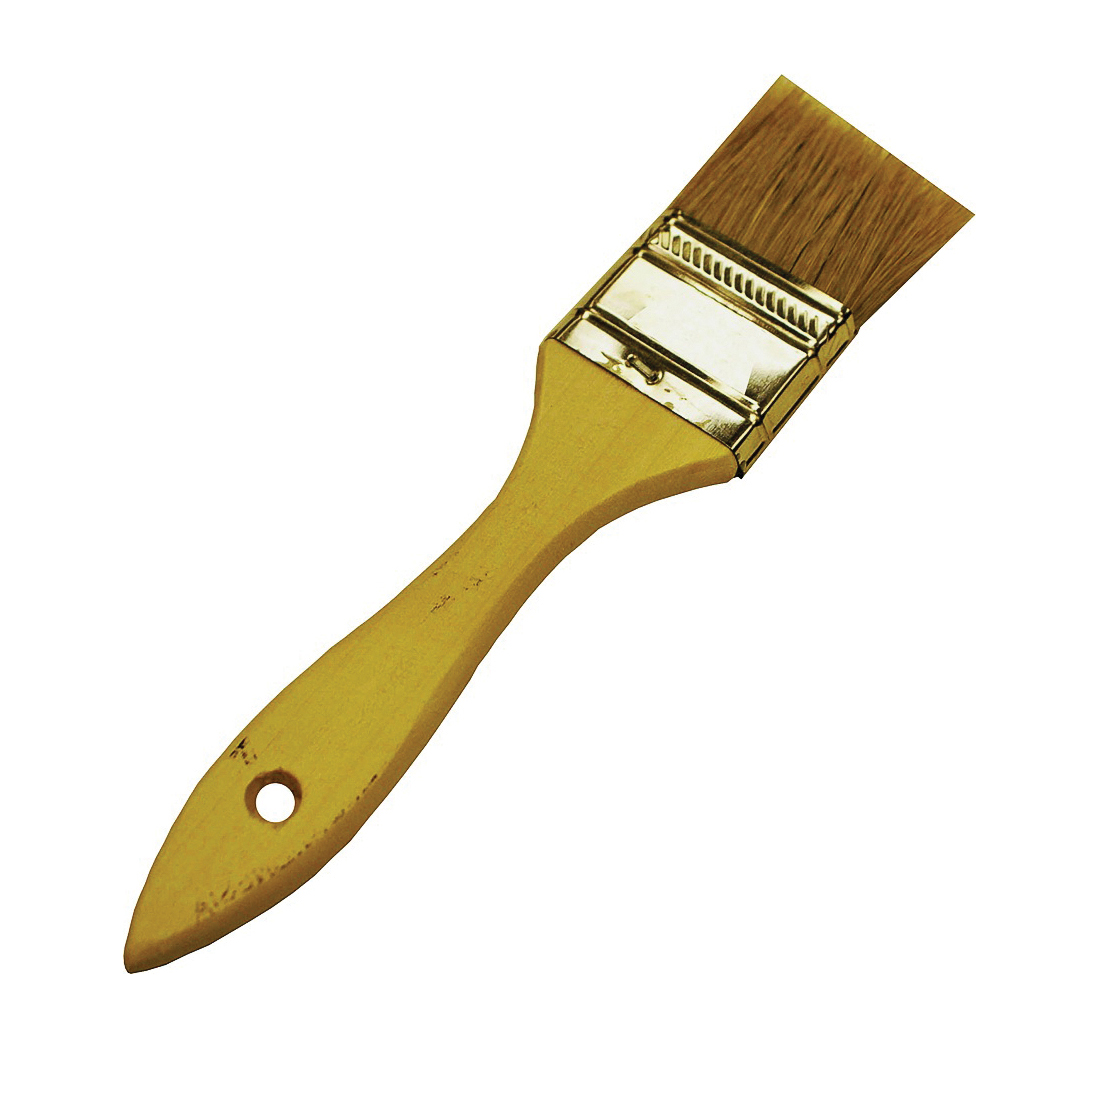 Wooster F5117-2 Paint Brush, 2 in W, 1-11/16 in L Bristle, China Bristle, Plain-Grip Handle